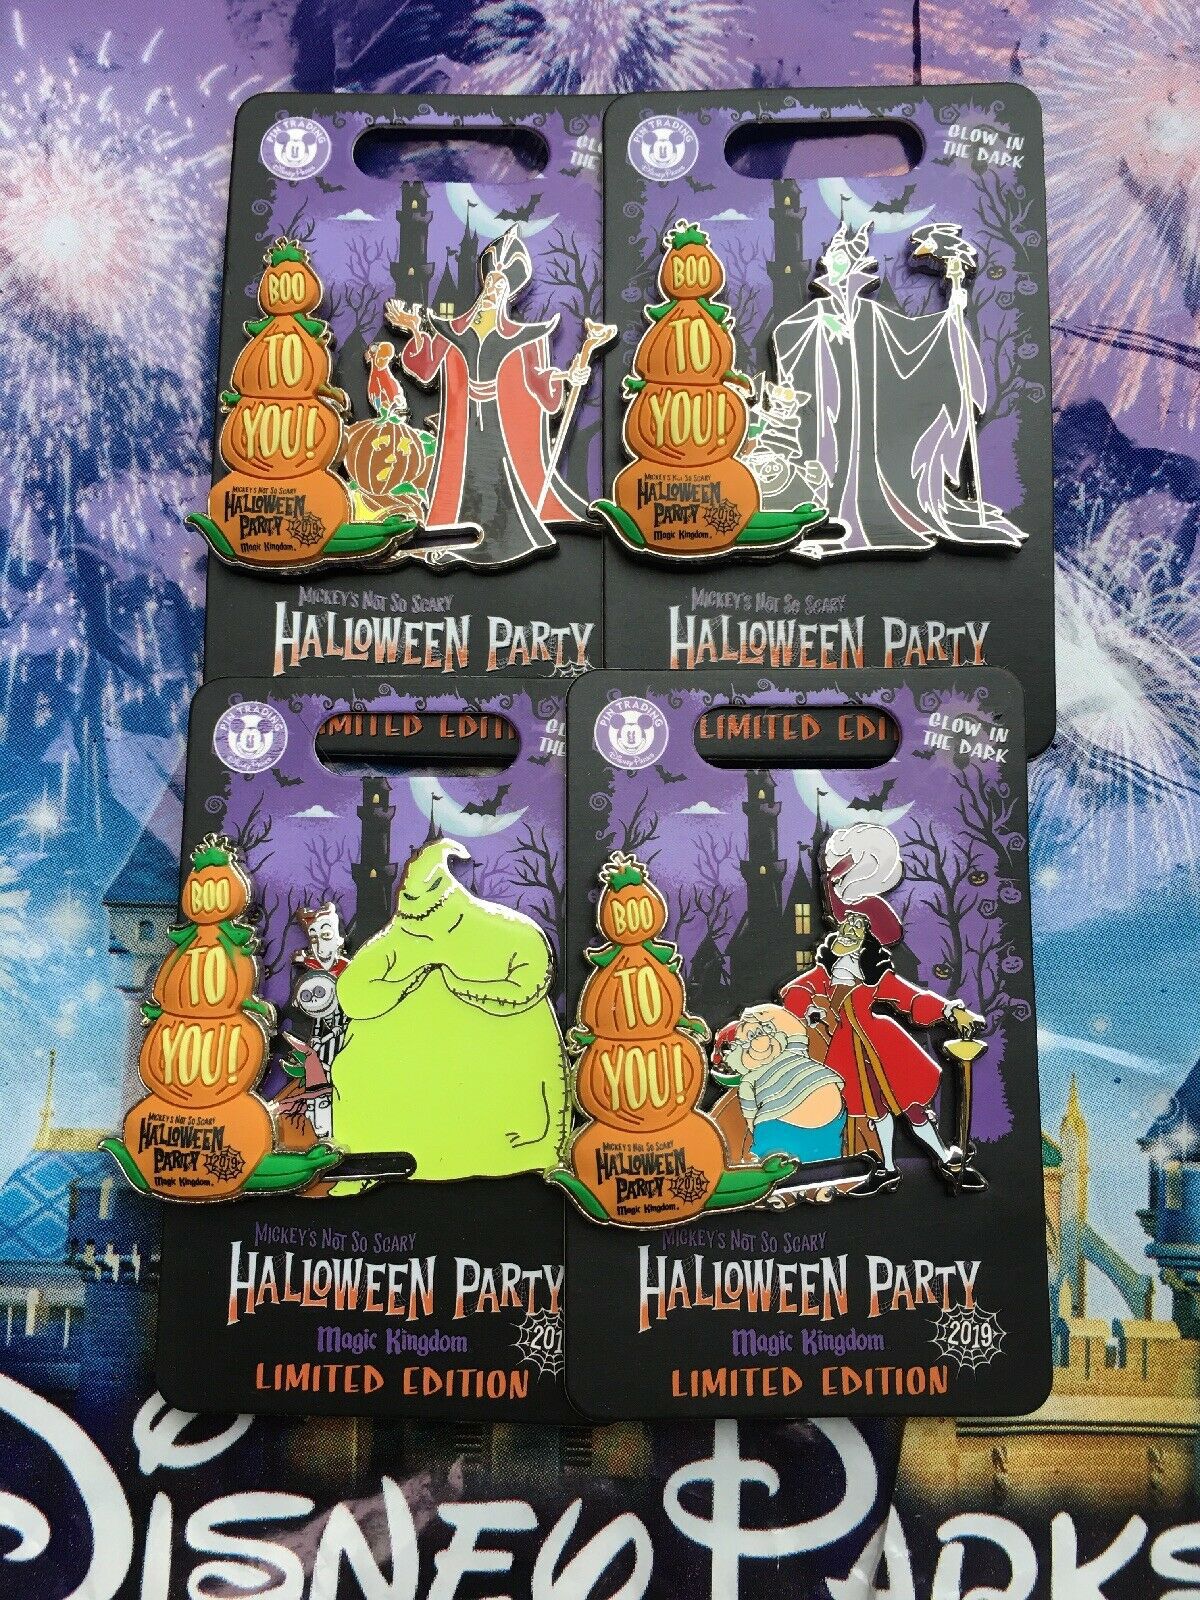 Disney Mickey's Not So Scary Halloween Party 2019 Set Of 4 Villain Pins Jafar, Maleficent, Hook, and Oogie Boogie